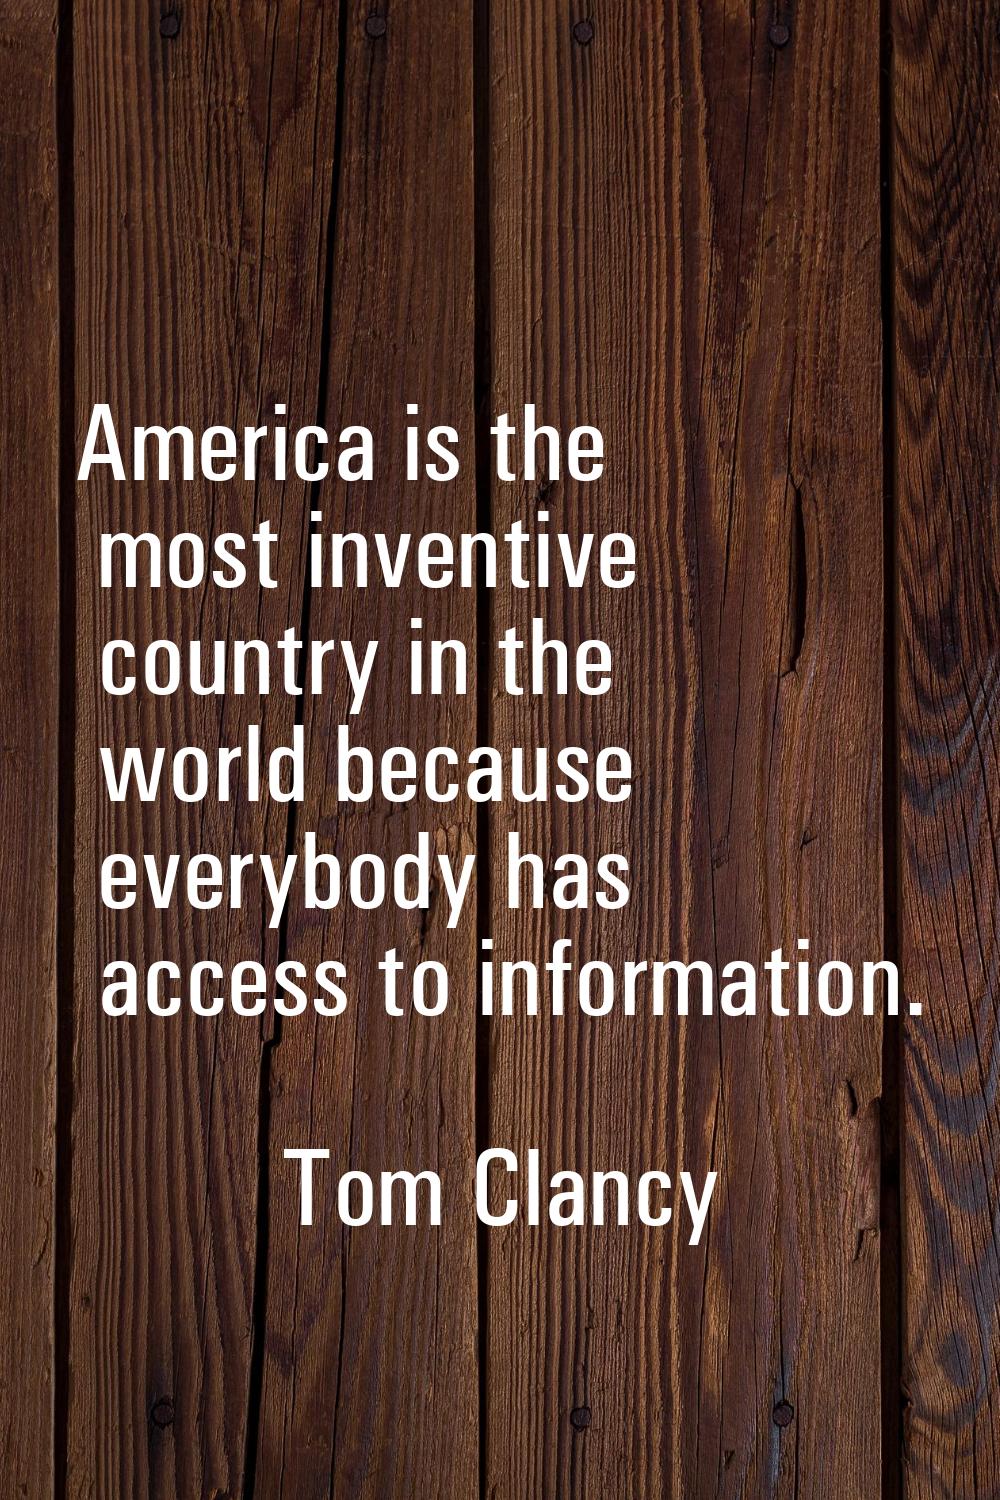 America is the most inventive country in the world because everybody has access to information.